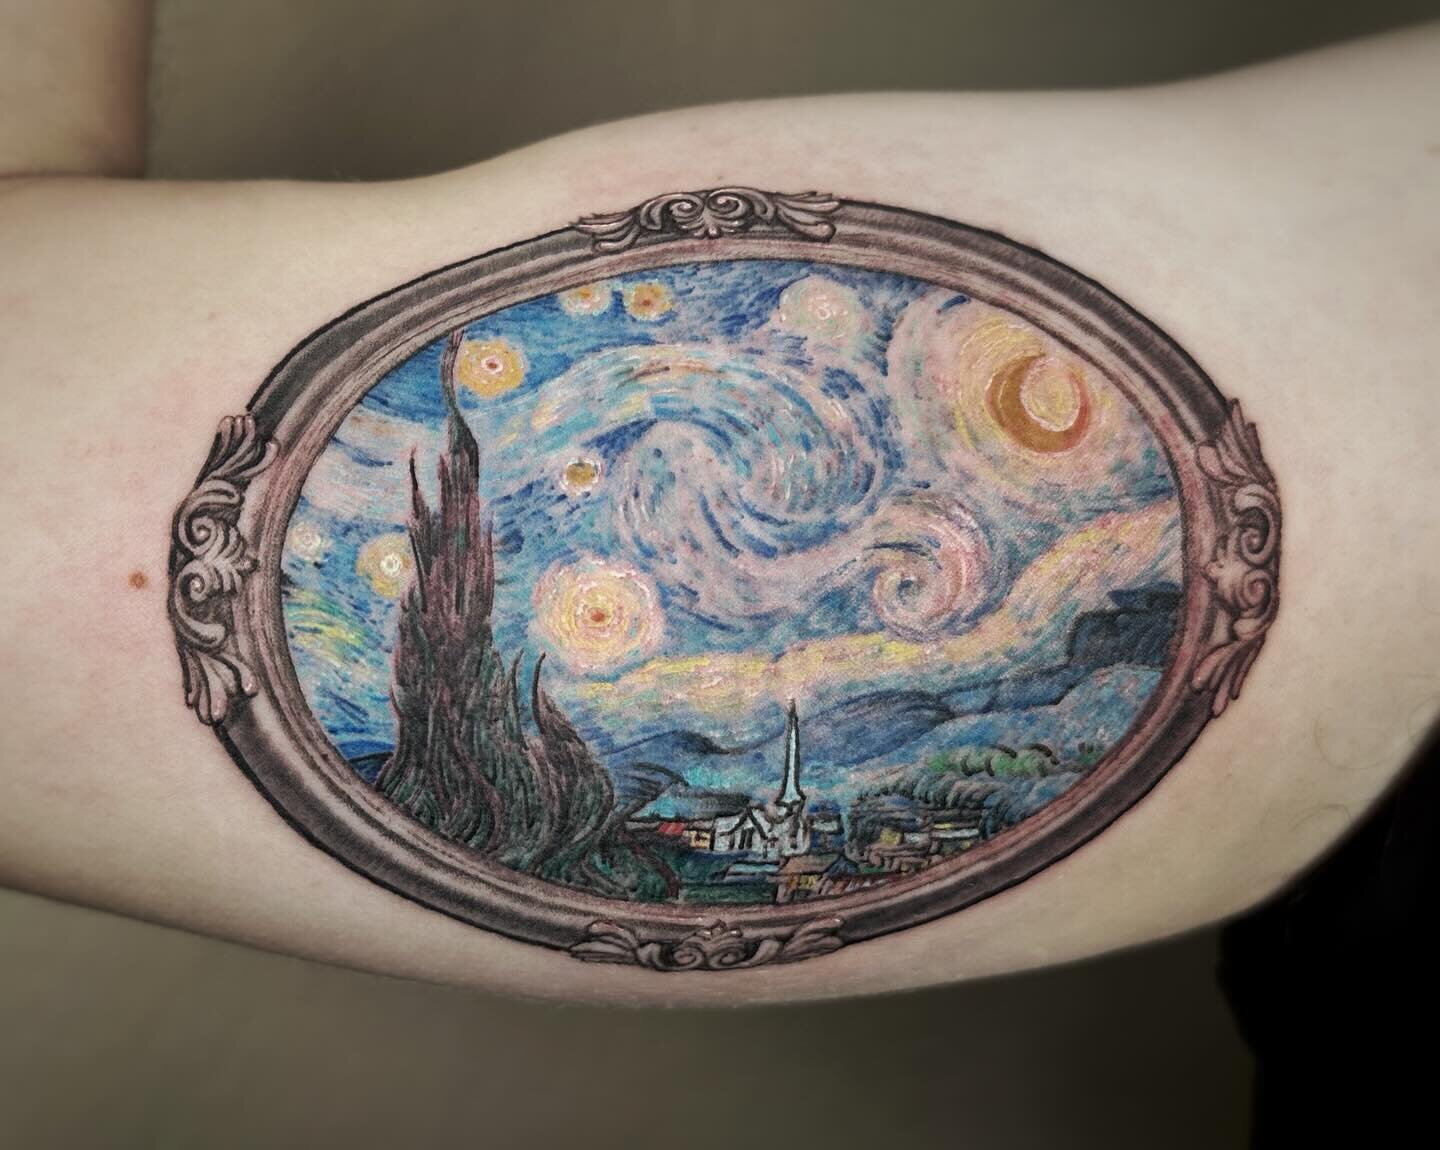 &ldquo;Starry Night&rdquo; by Van Gogh interpreted by yours truly🤌🏽✨ Shout out to Sam for sitting like the champ he is on this sensitive spot!🫡 Swipe for the actual painting my client saw in person! #starrynight #vangogh #colortattoo #arkansas #ar